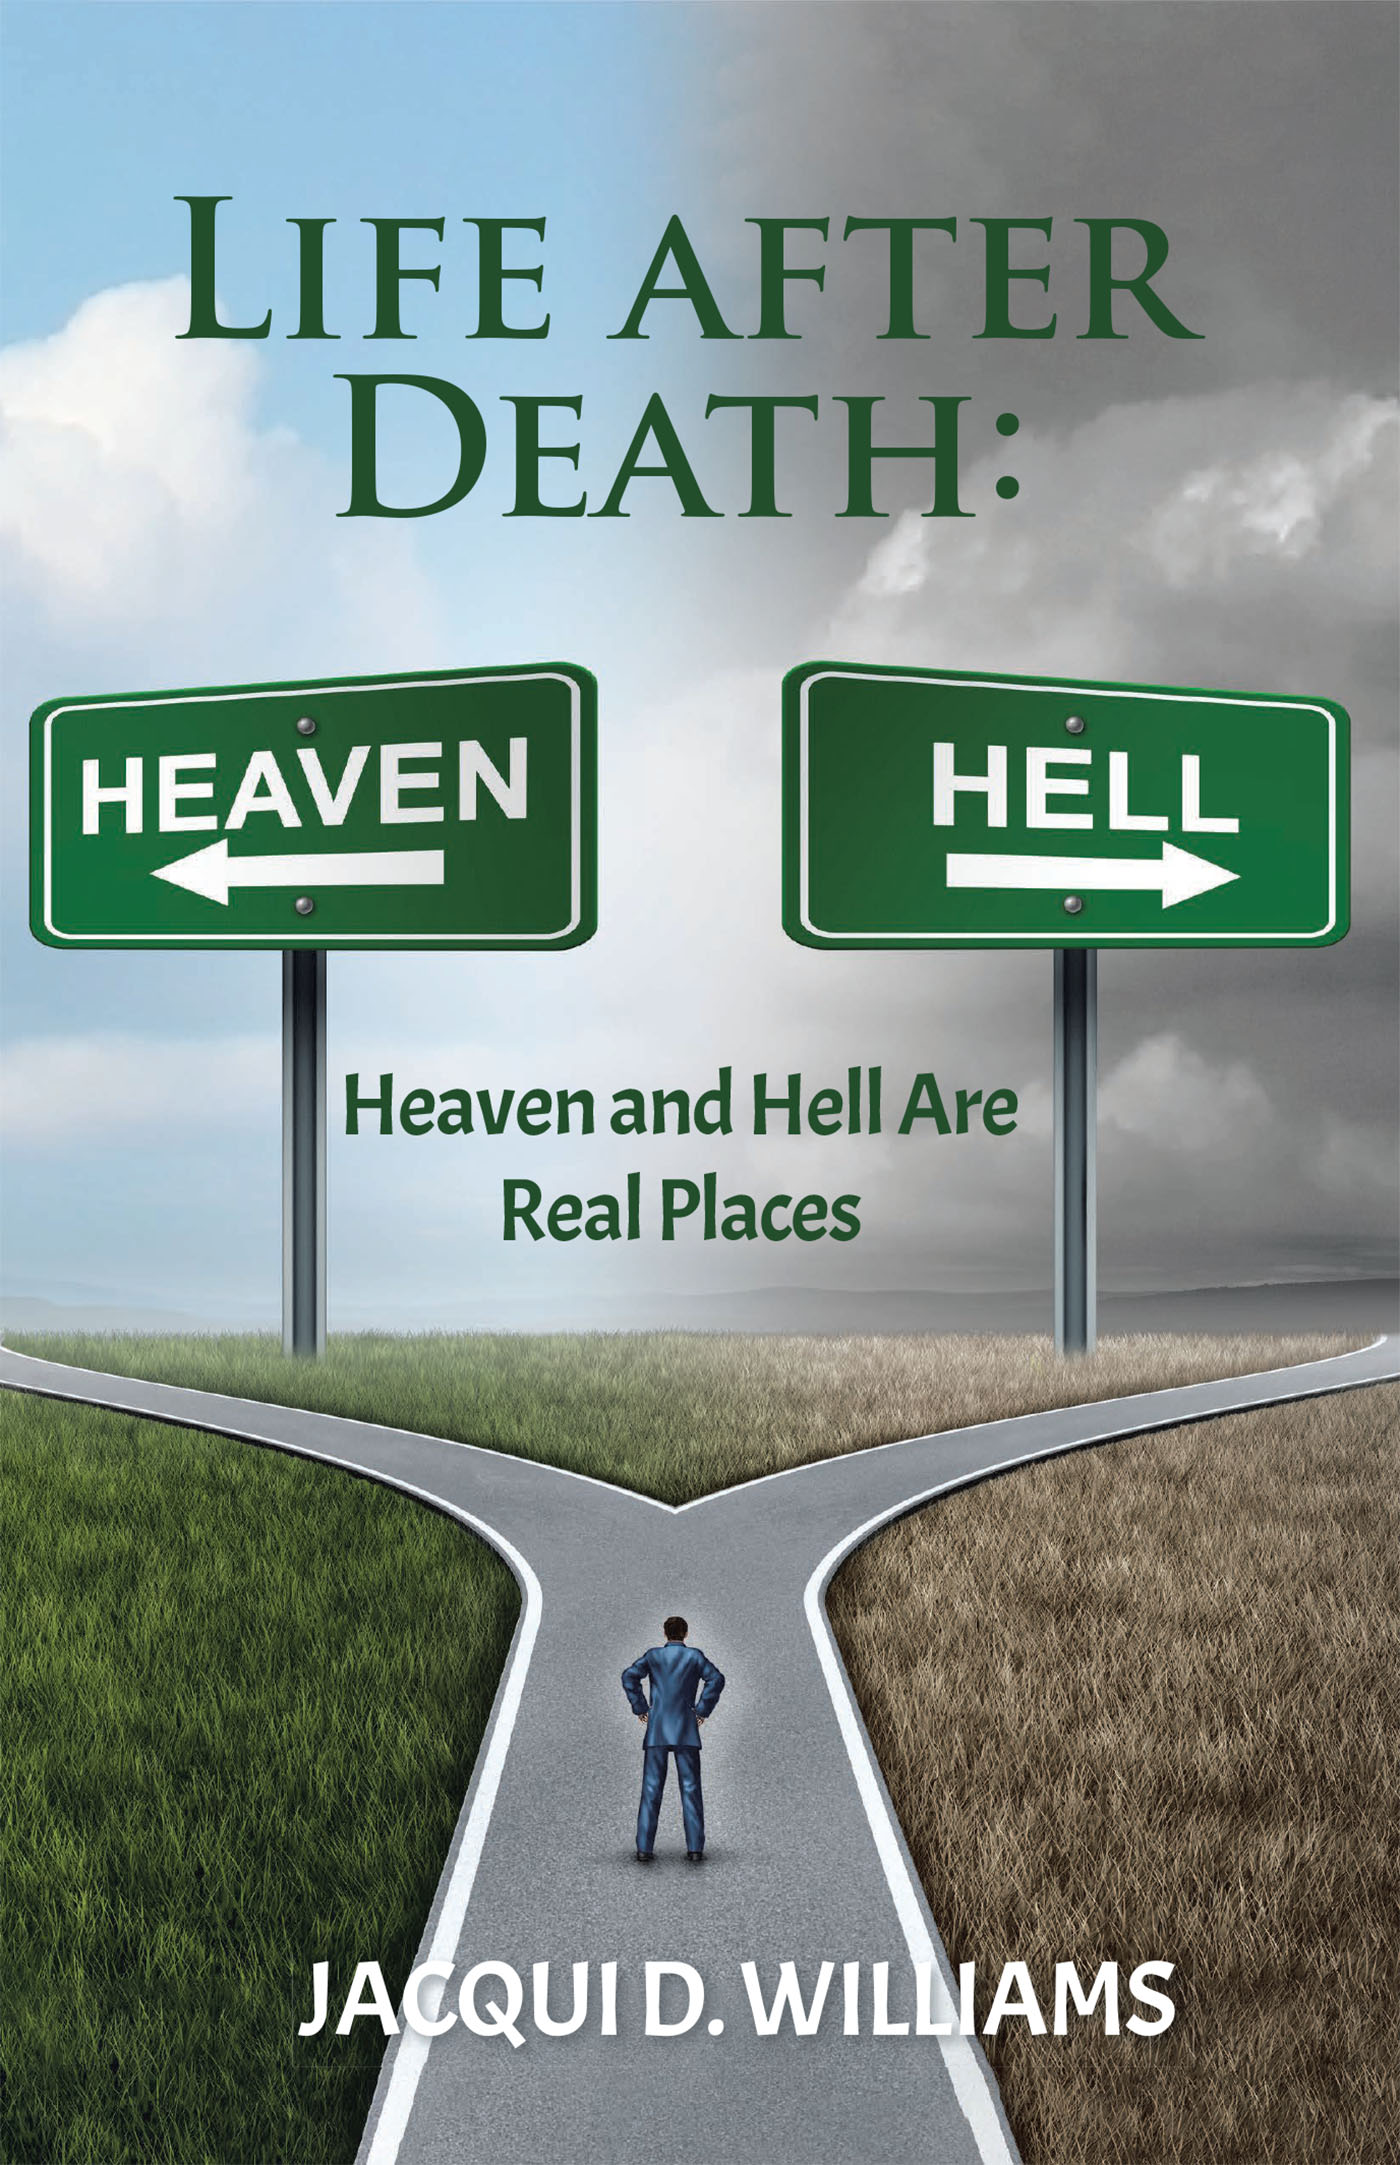 Jacqui D. Williams’s Newly Released "Life After Death: Heaven and Hell Are Real Places" is a Thought-Provoking Exploration of Eternity